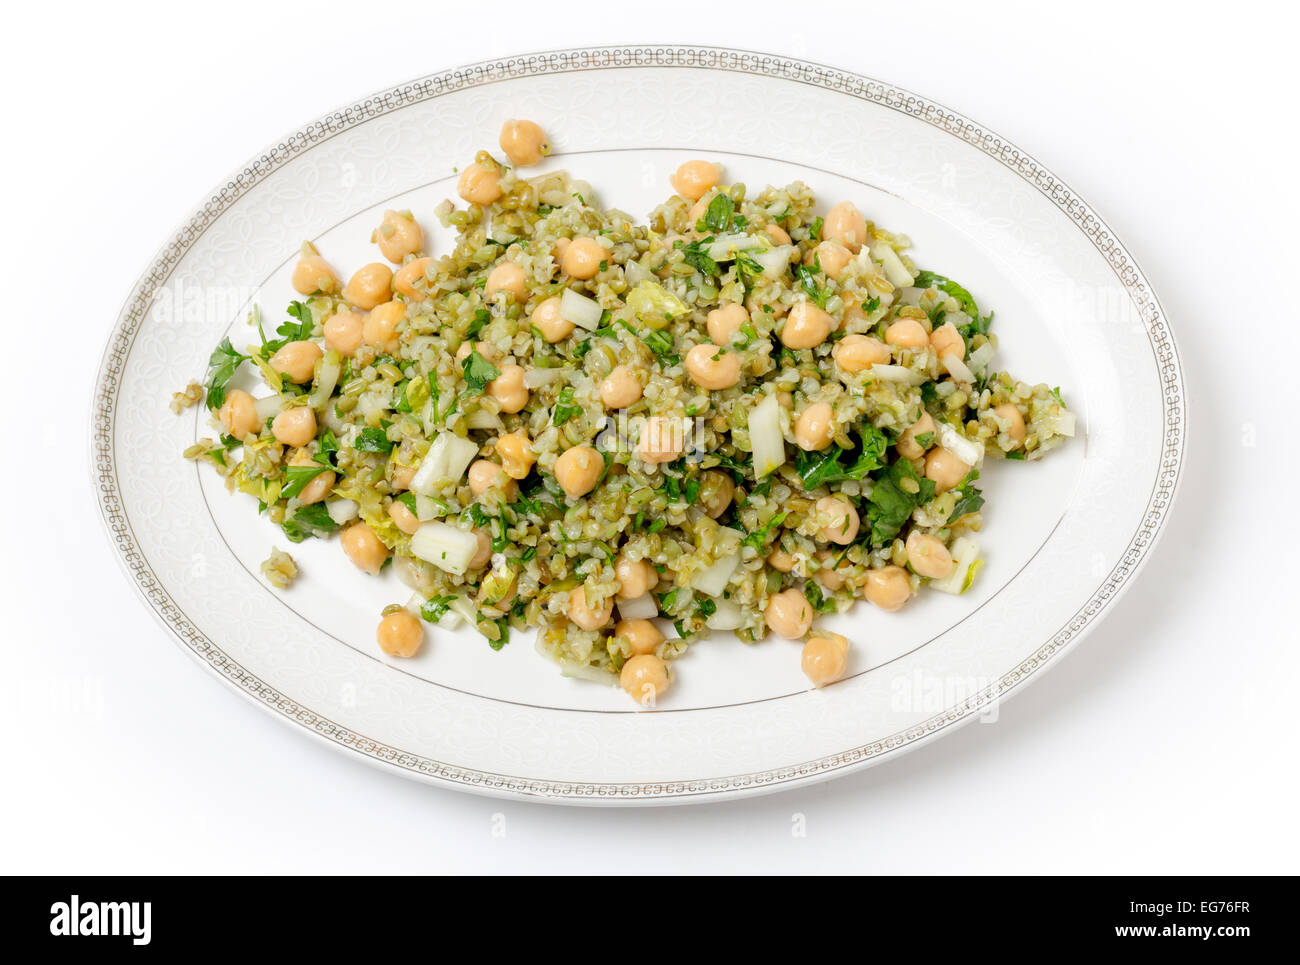 Freekeh salad with chickpeas, onion, parsley, celery, and a lemon juice and olive oil dressing Stock Photo